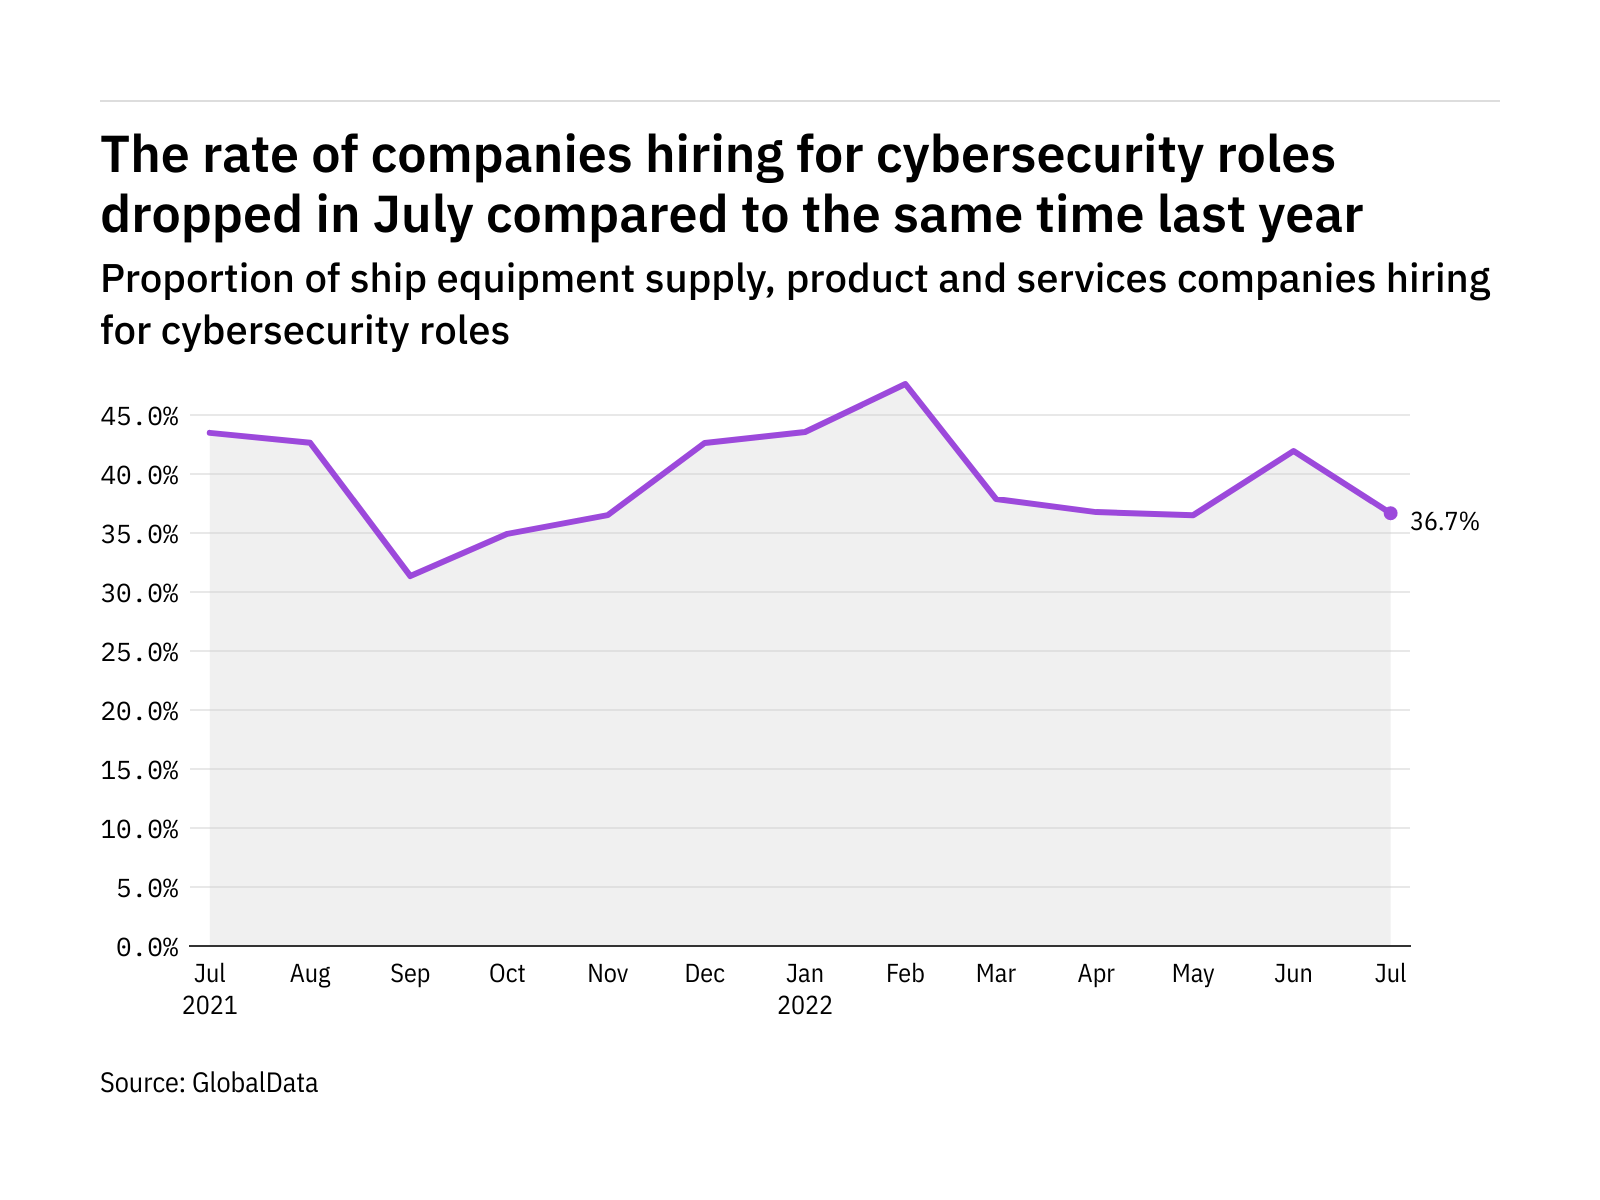 Cybersecurity hiring levels in the ship industry dropped in July 2022